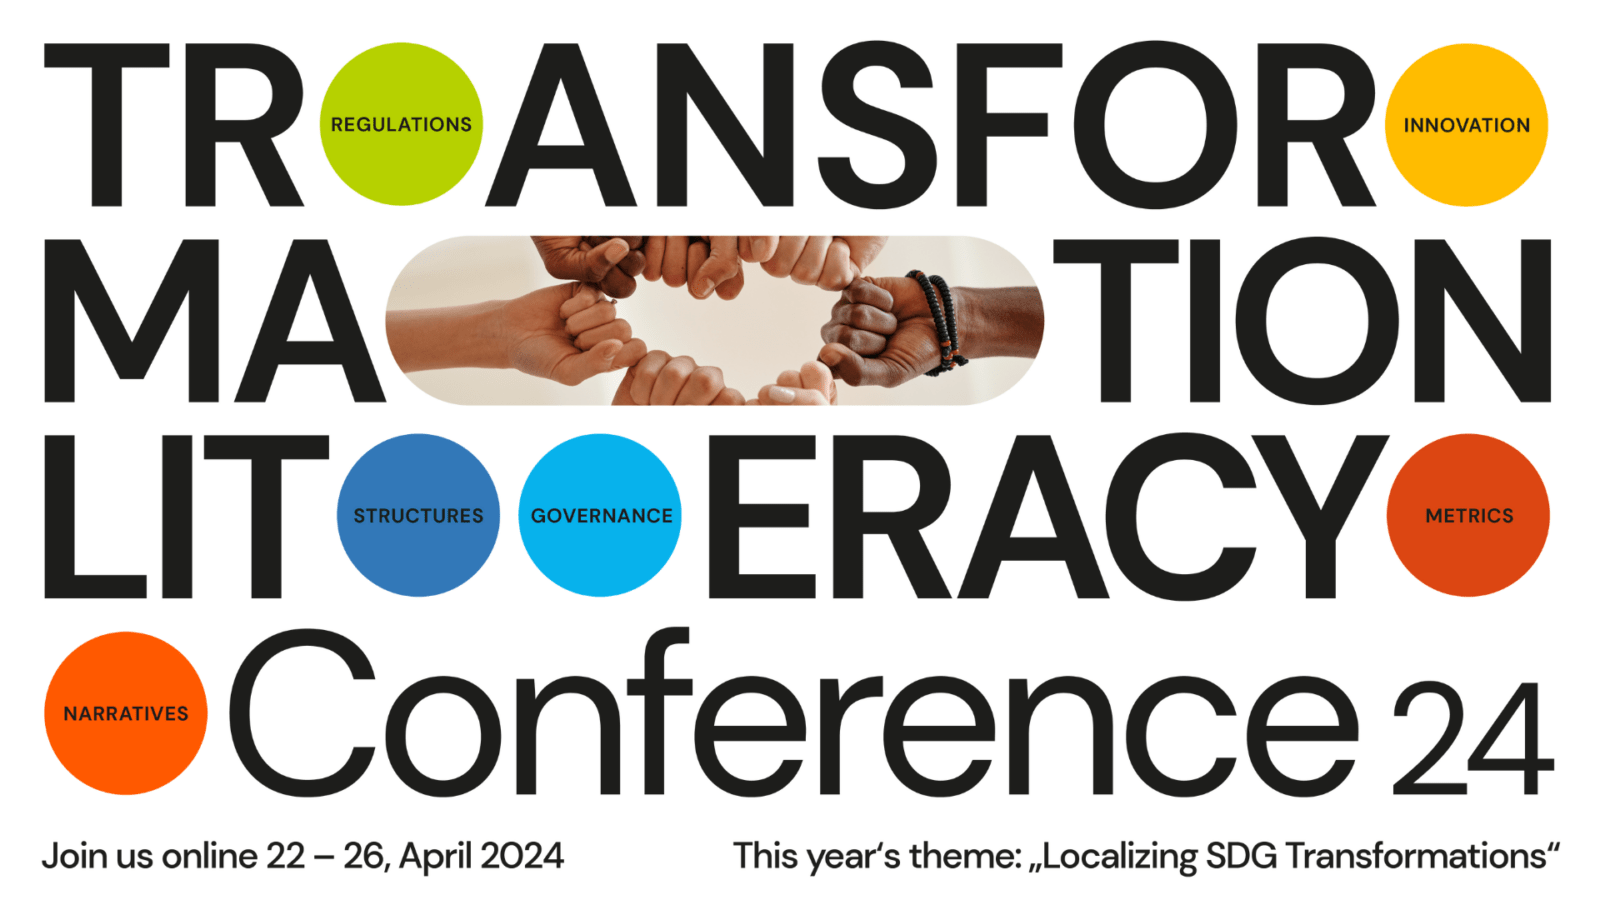 CLI’s Transformation Literacy Conference 2024 – Localizing SDG Transformations